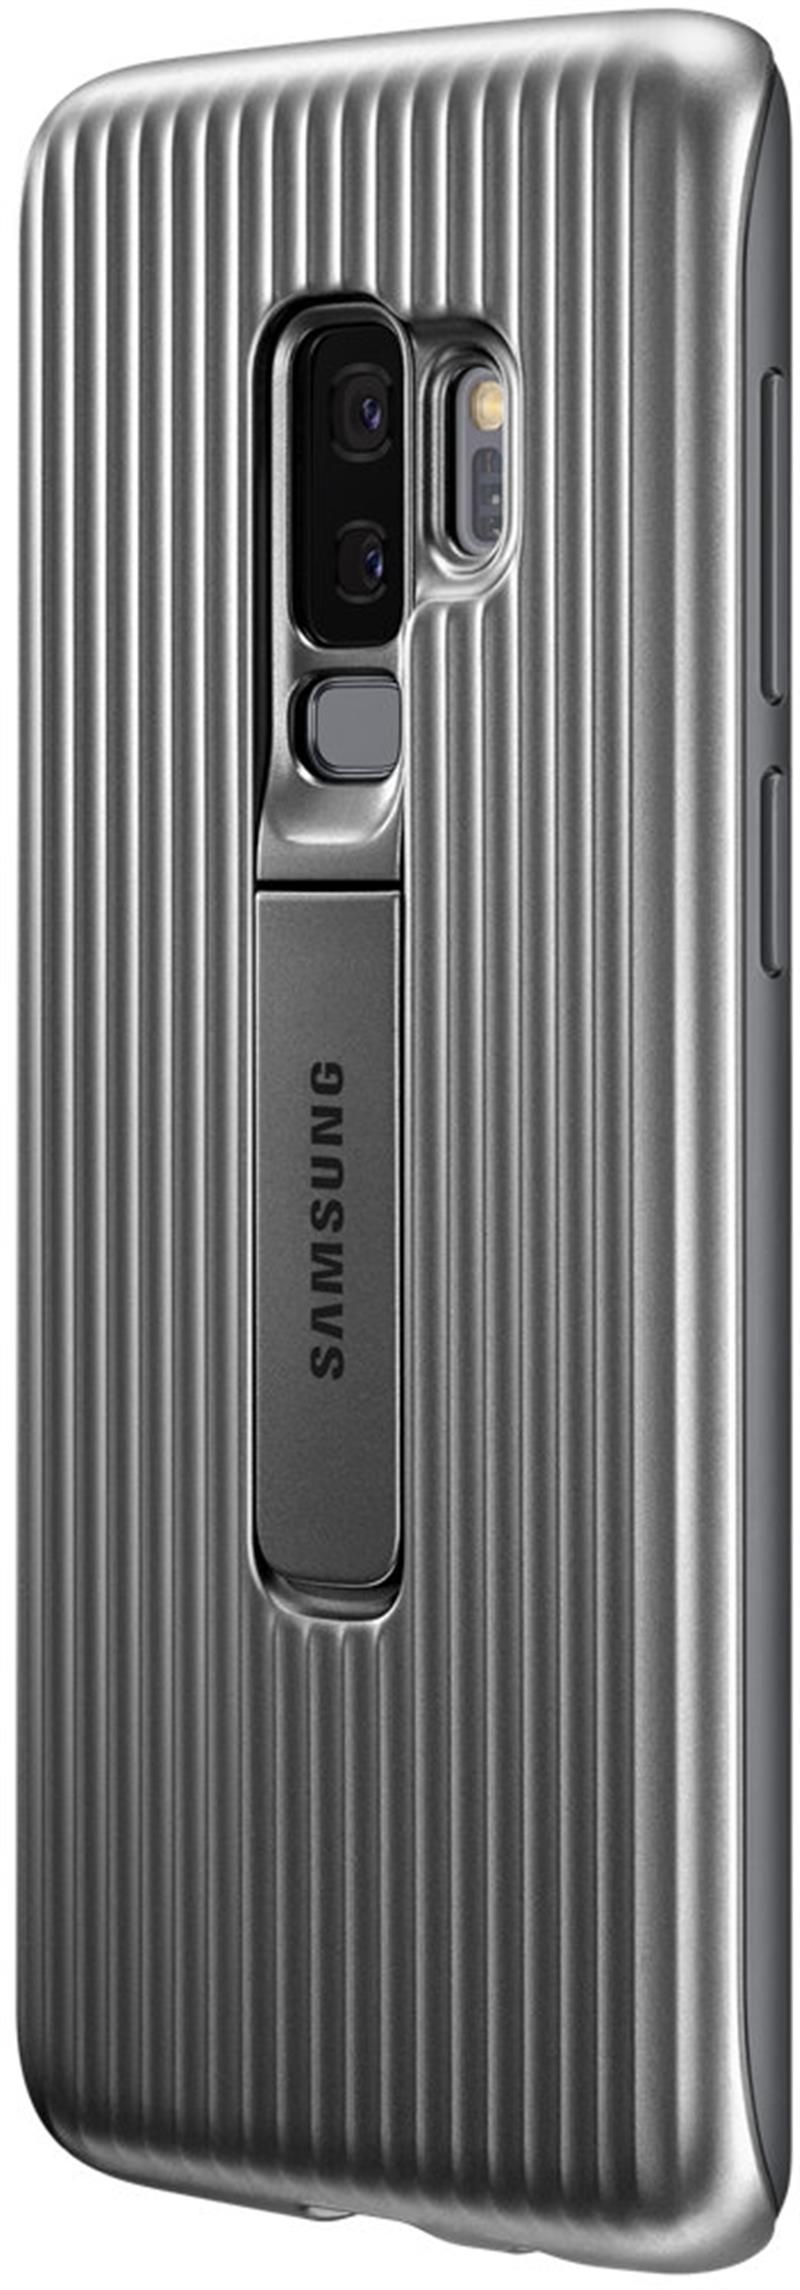  Samsung Protective Standing Cover Galaxy S9 Silver